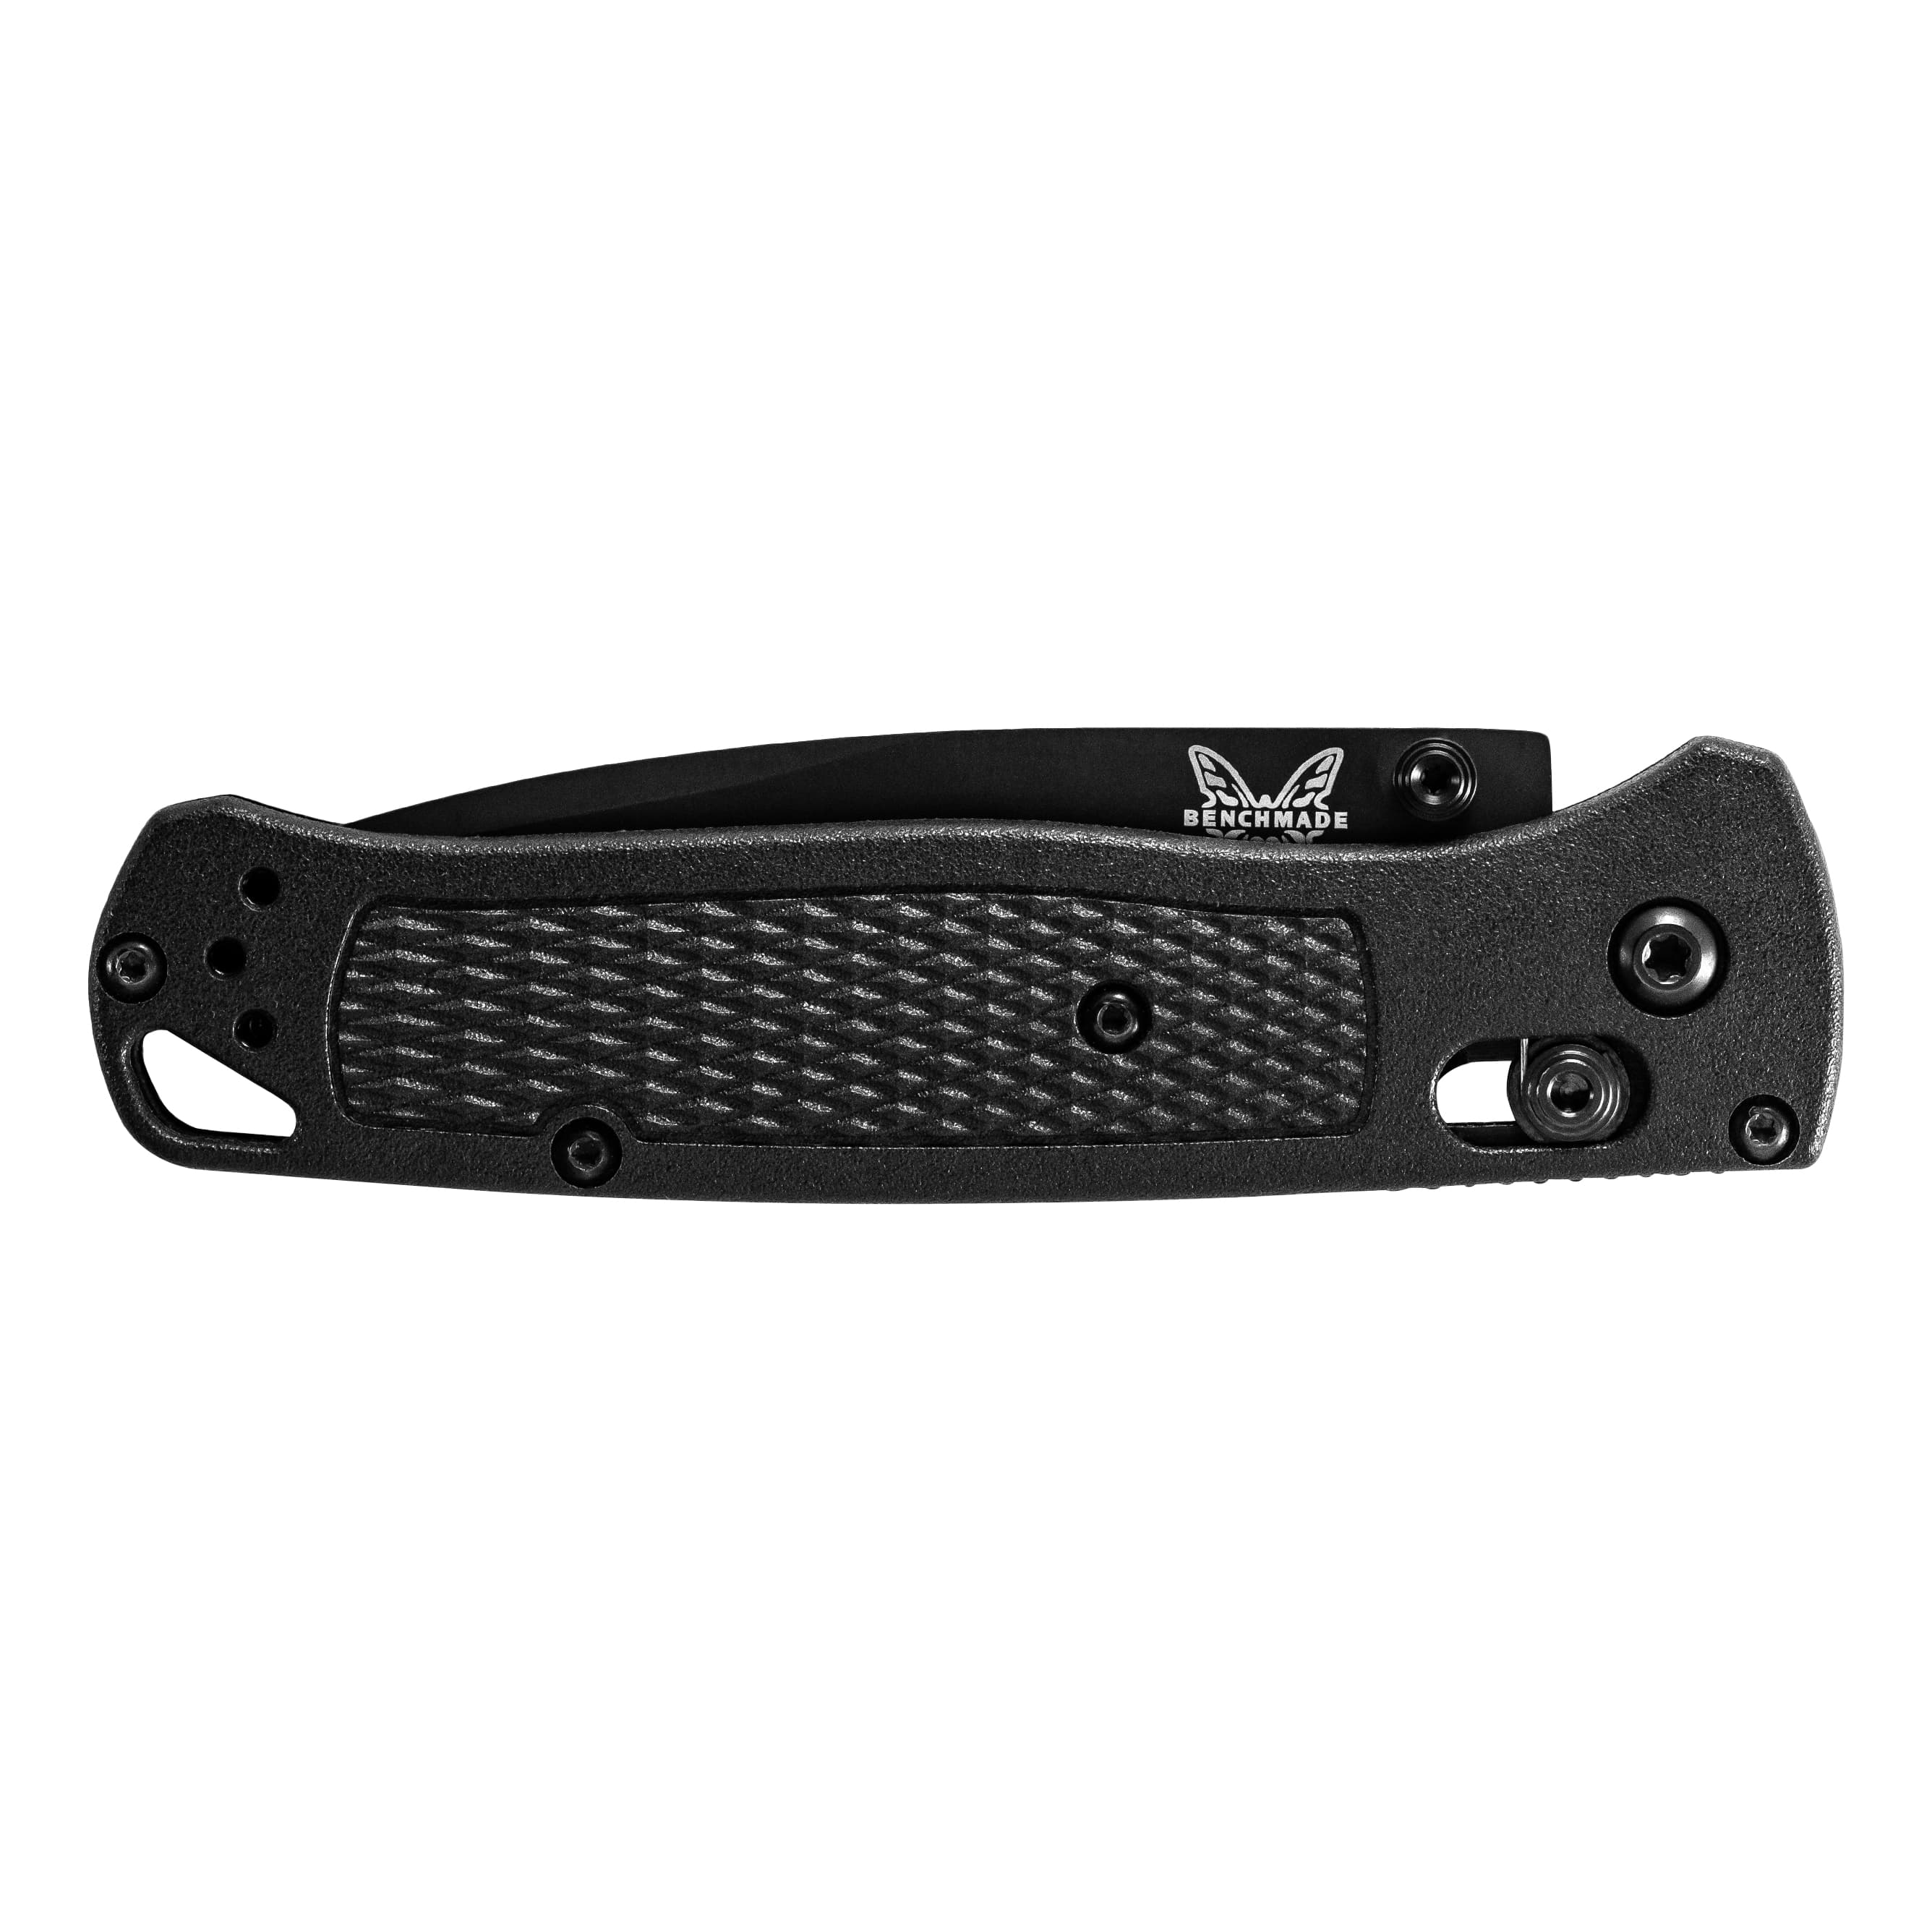 Benchmade® 535 Bugout Folding Knife - Closed View